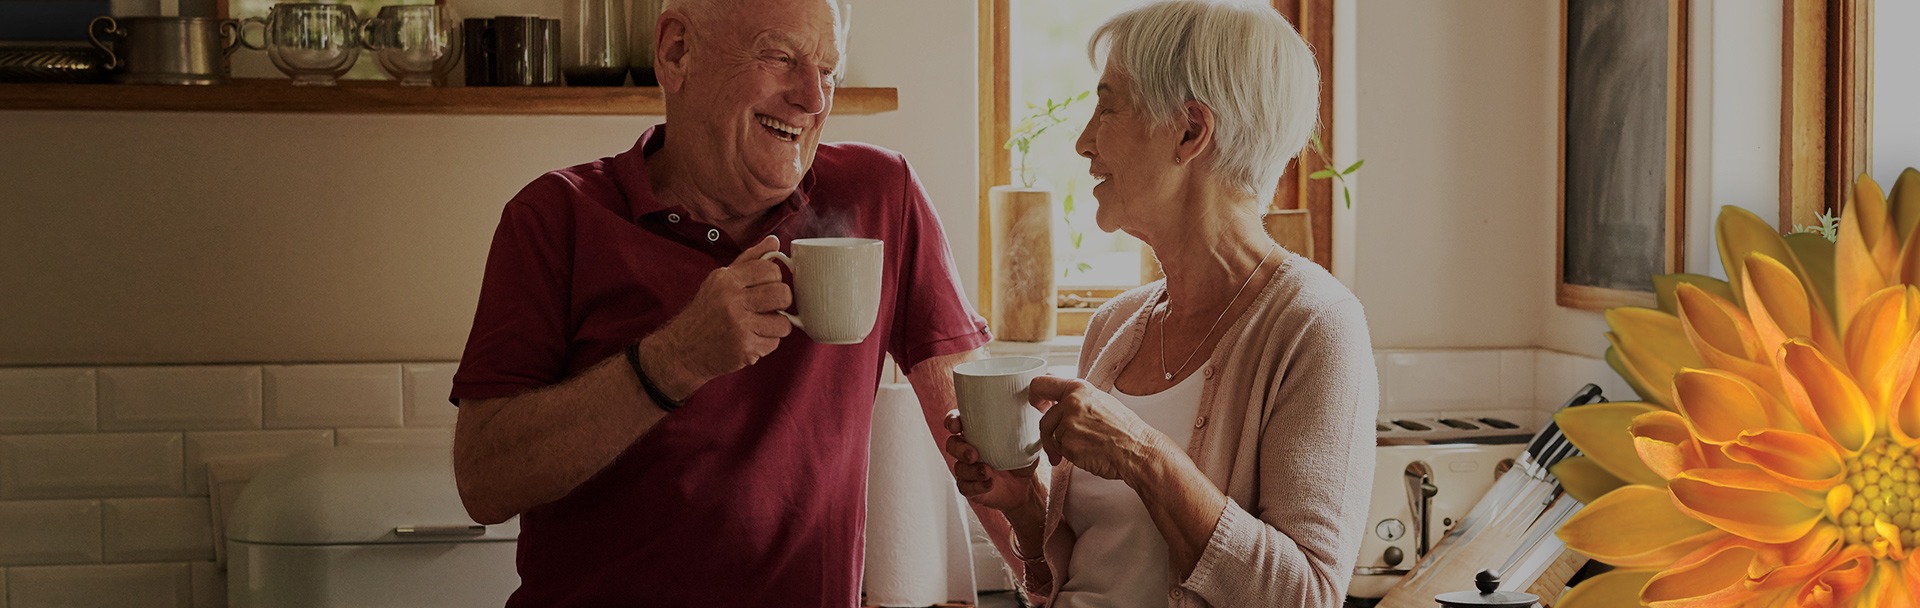 An older man and woman laughing with each other, holding a mug, in a kitchen setting